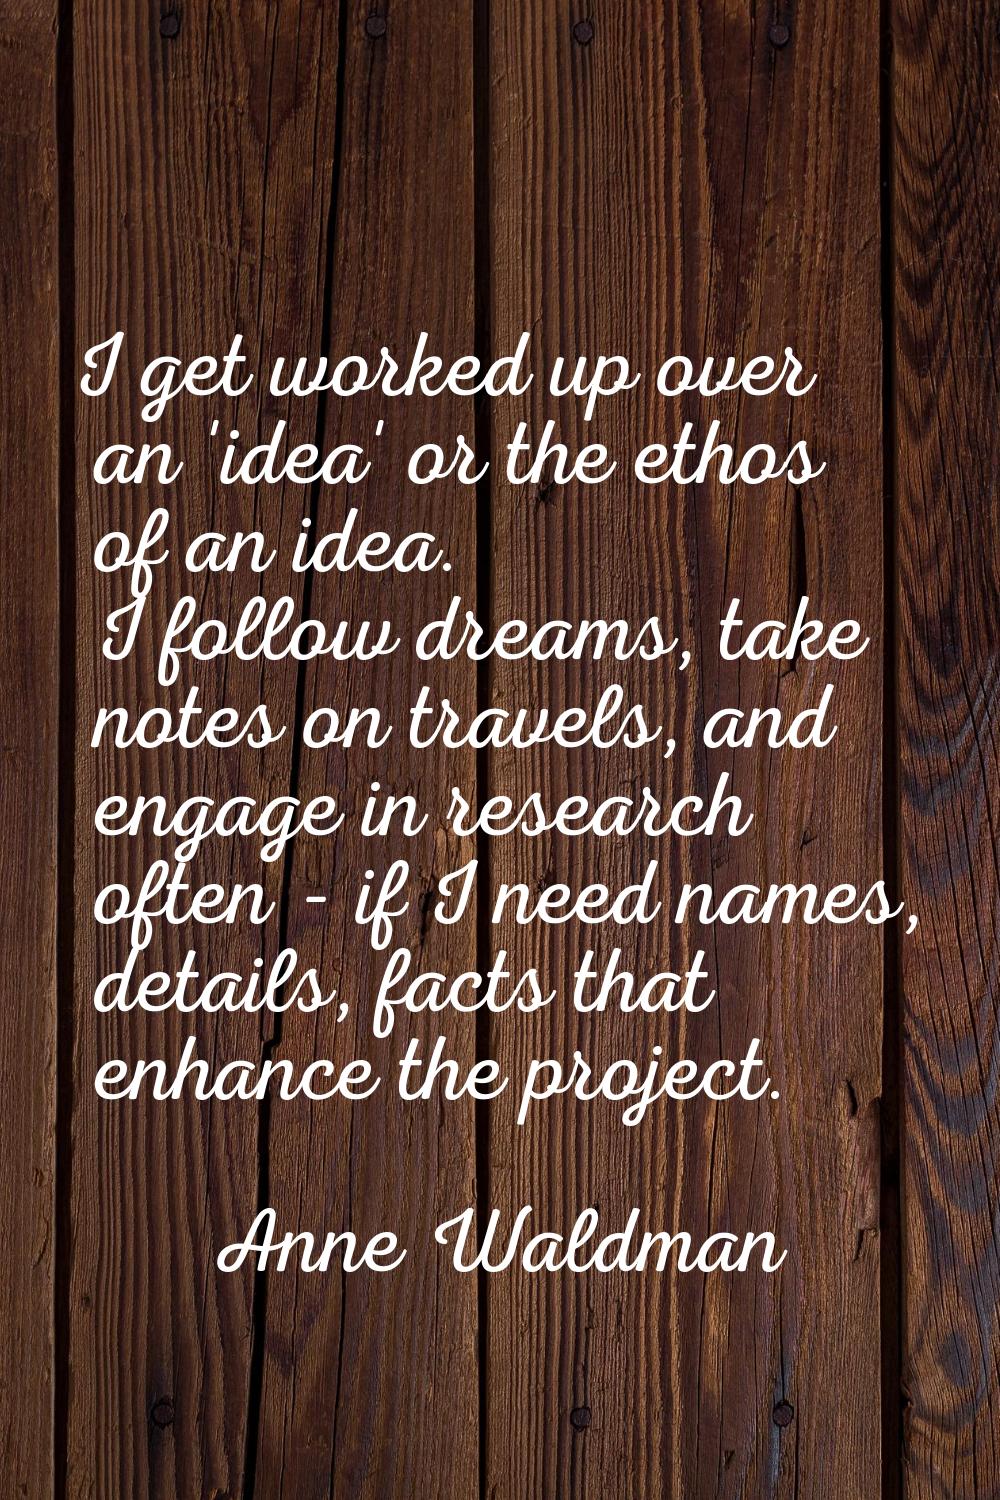 I get worked up over an 'idea' or the ethos of an idea. I follow dreams, take notes on travels, and